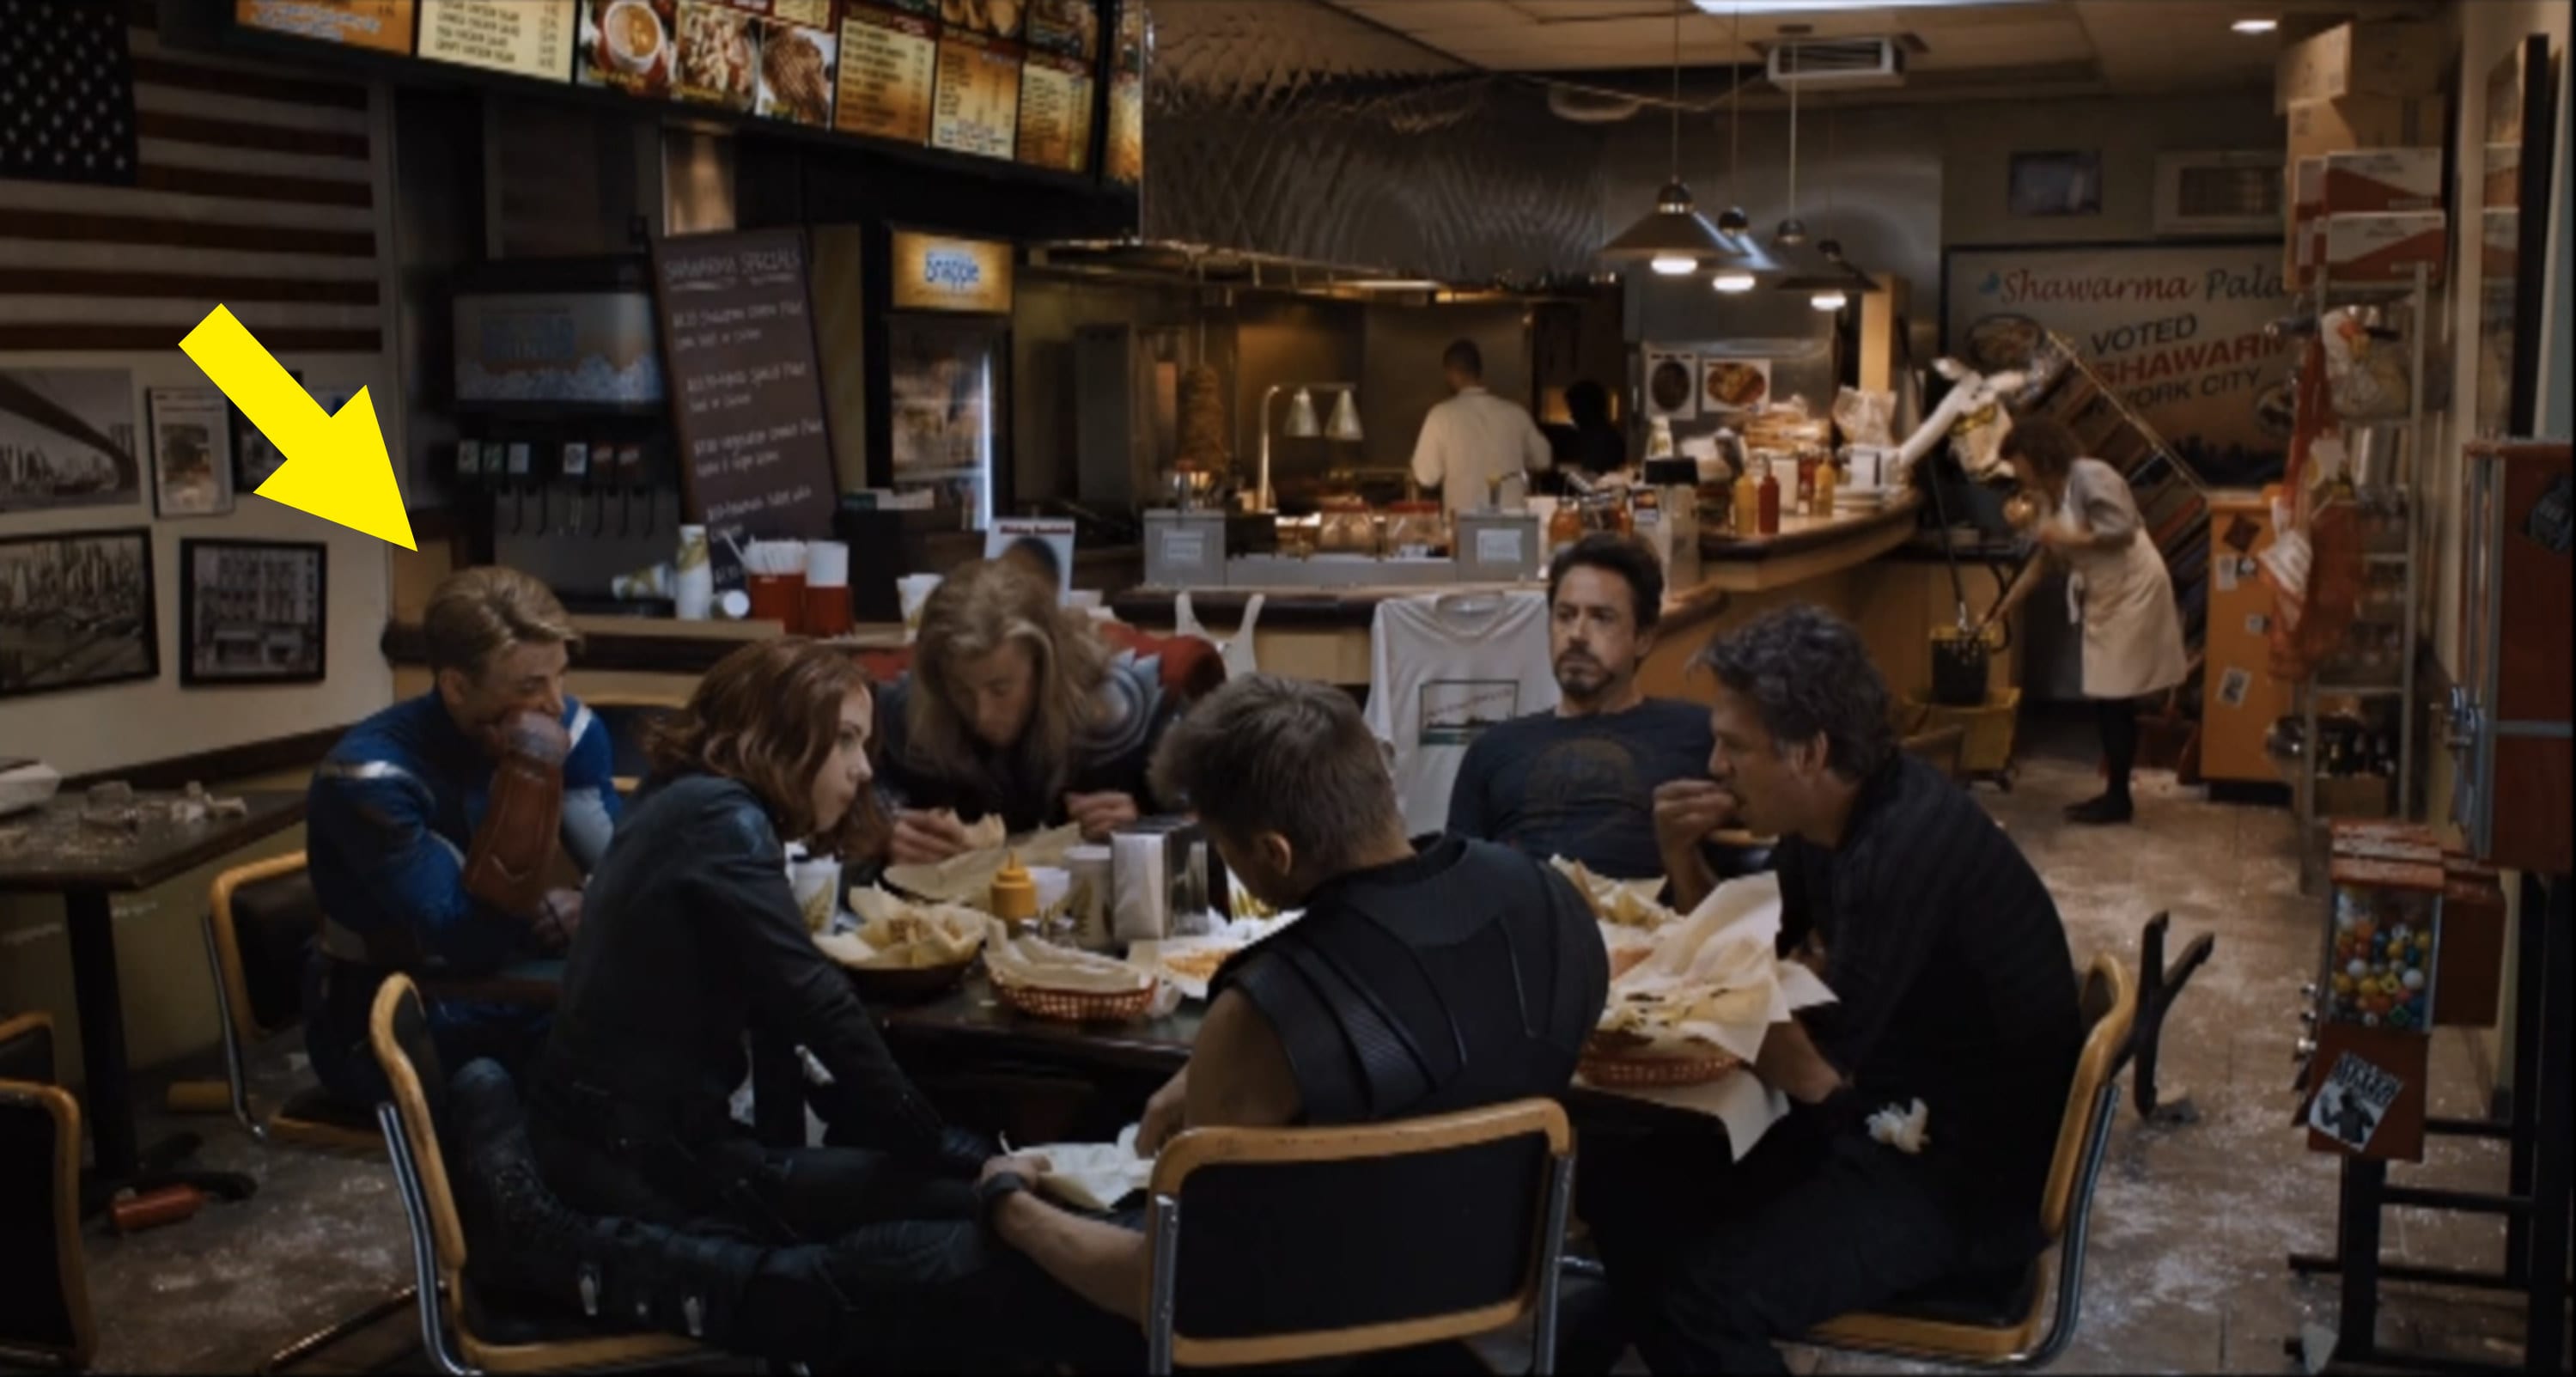 The Avengers eating shawarma at the end of "The Avengers."